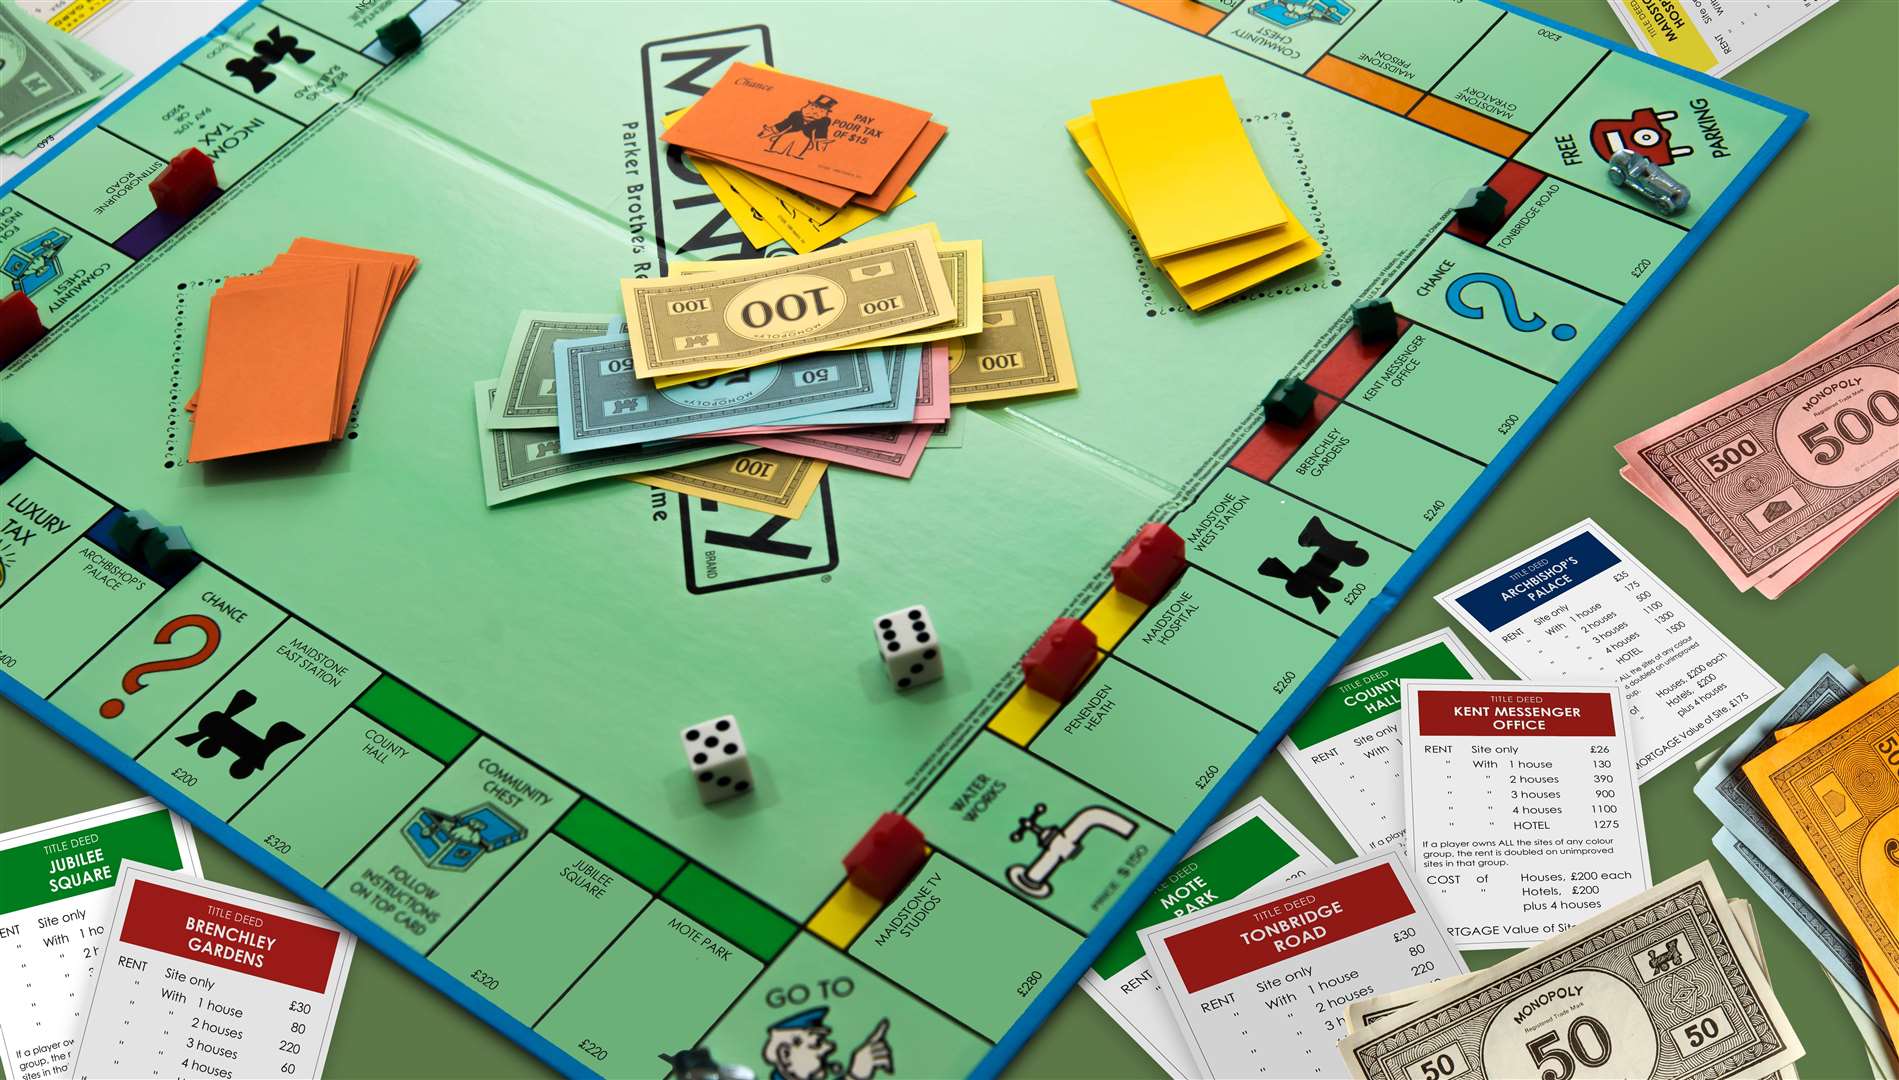 How a Maidstone version of Monopoly could look